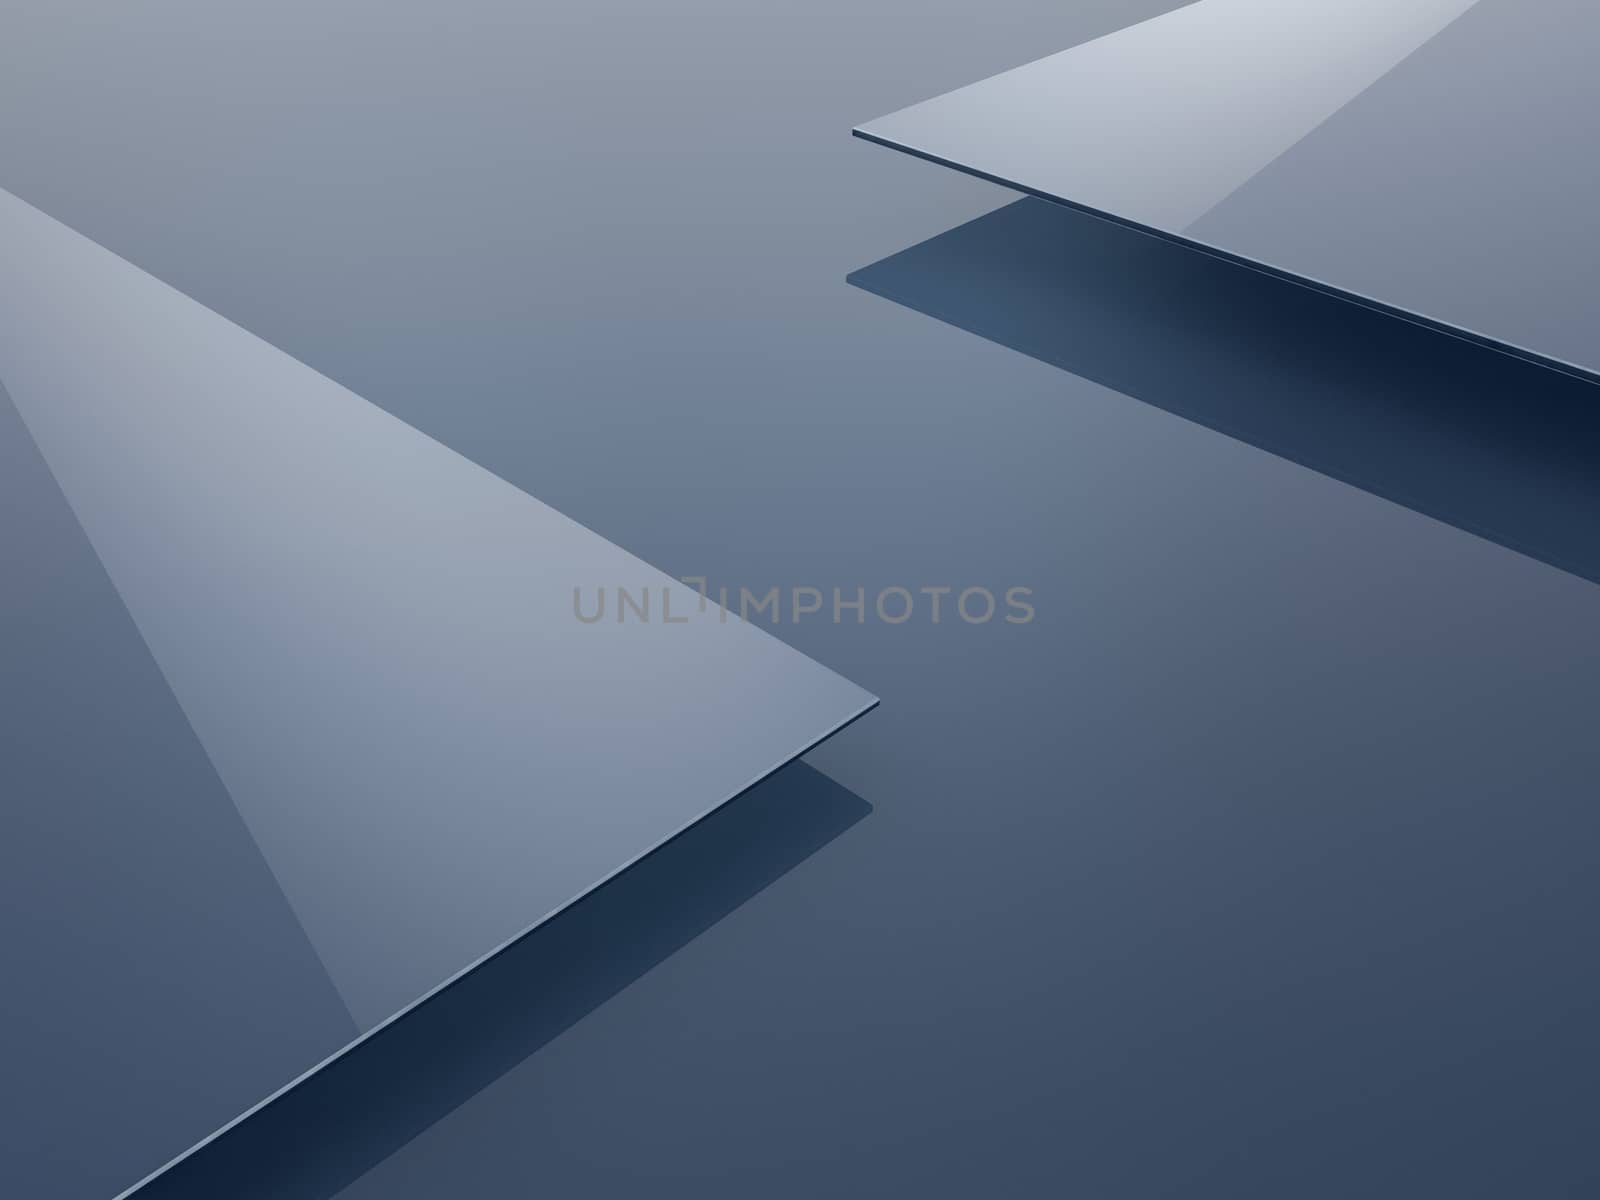 Abstract polygonal background, geometric 3D illustration. Creative design template.